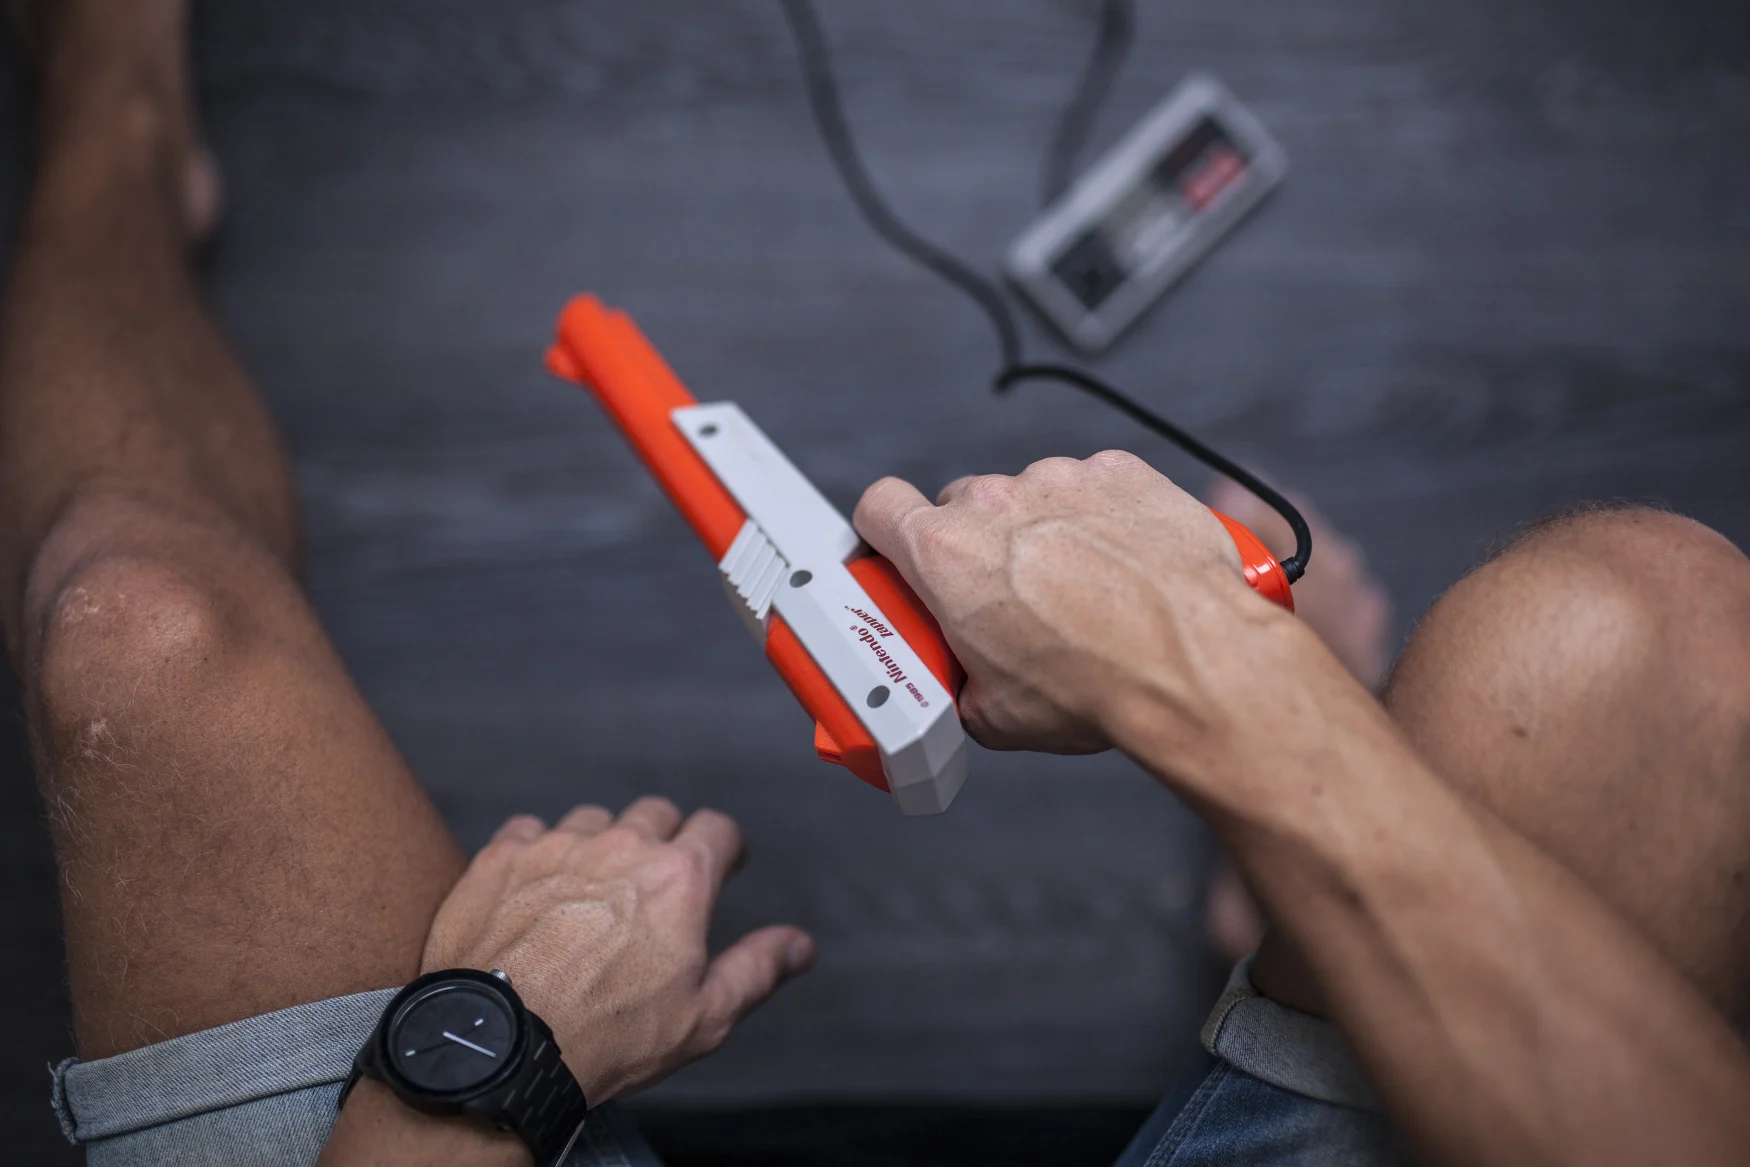 Gothenburg, Sweden - January 31, 2015: A shot from above of a young man's hands using a 1985 Nintendo Zapper, a remote game controller for the Nintendo Entertainment System developed by Nintendo Co., Ltd. in the 1980s. His hands are posing casually as he is resting between games. Natural lighting. Shot on a grey wooden background.